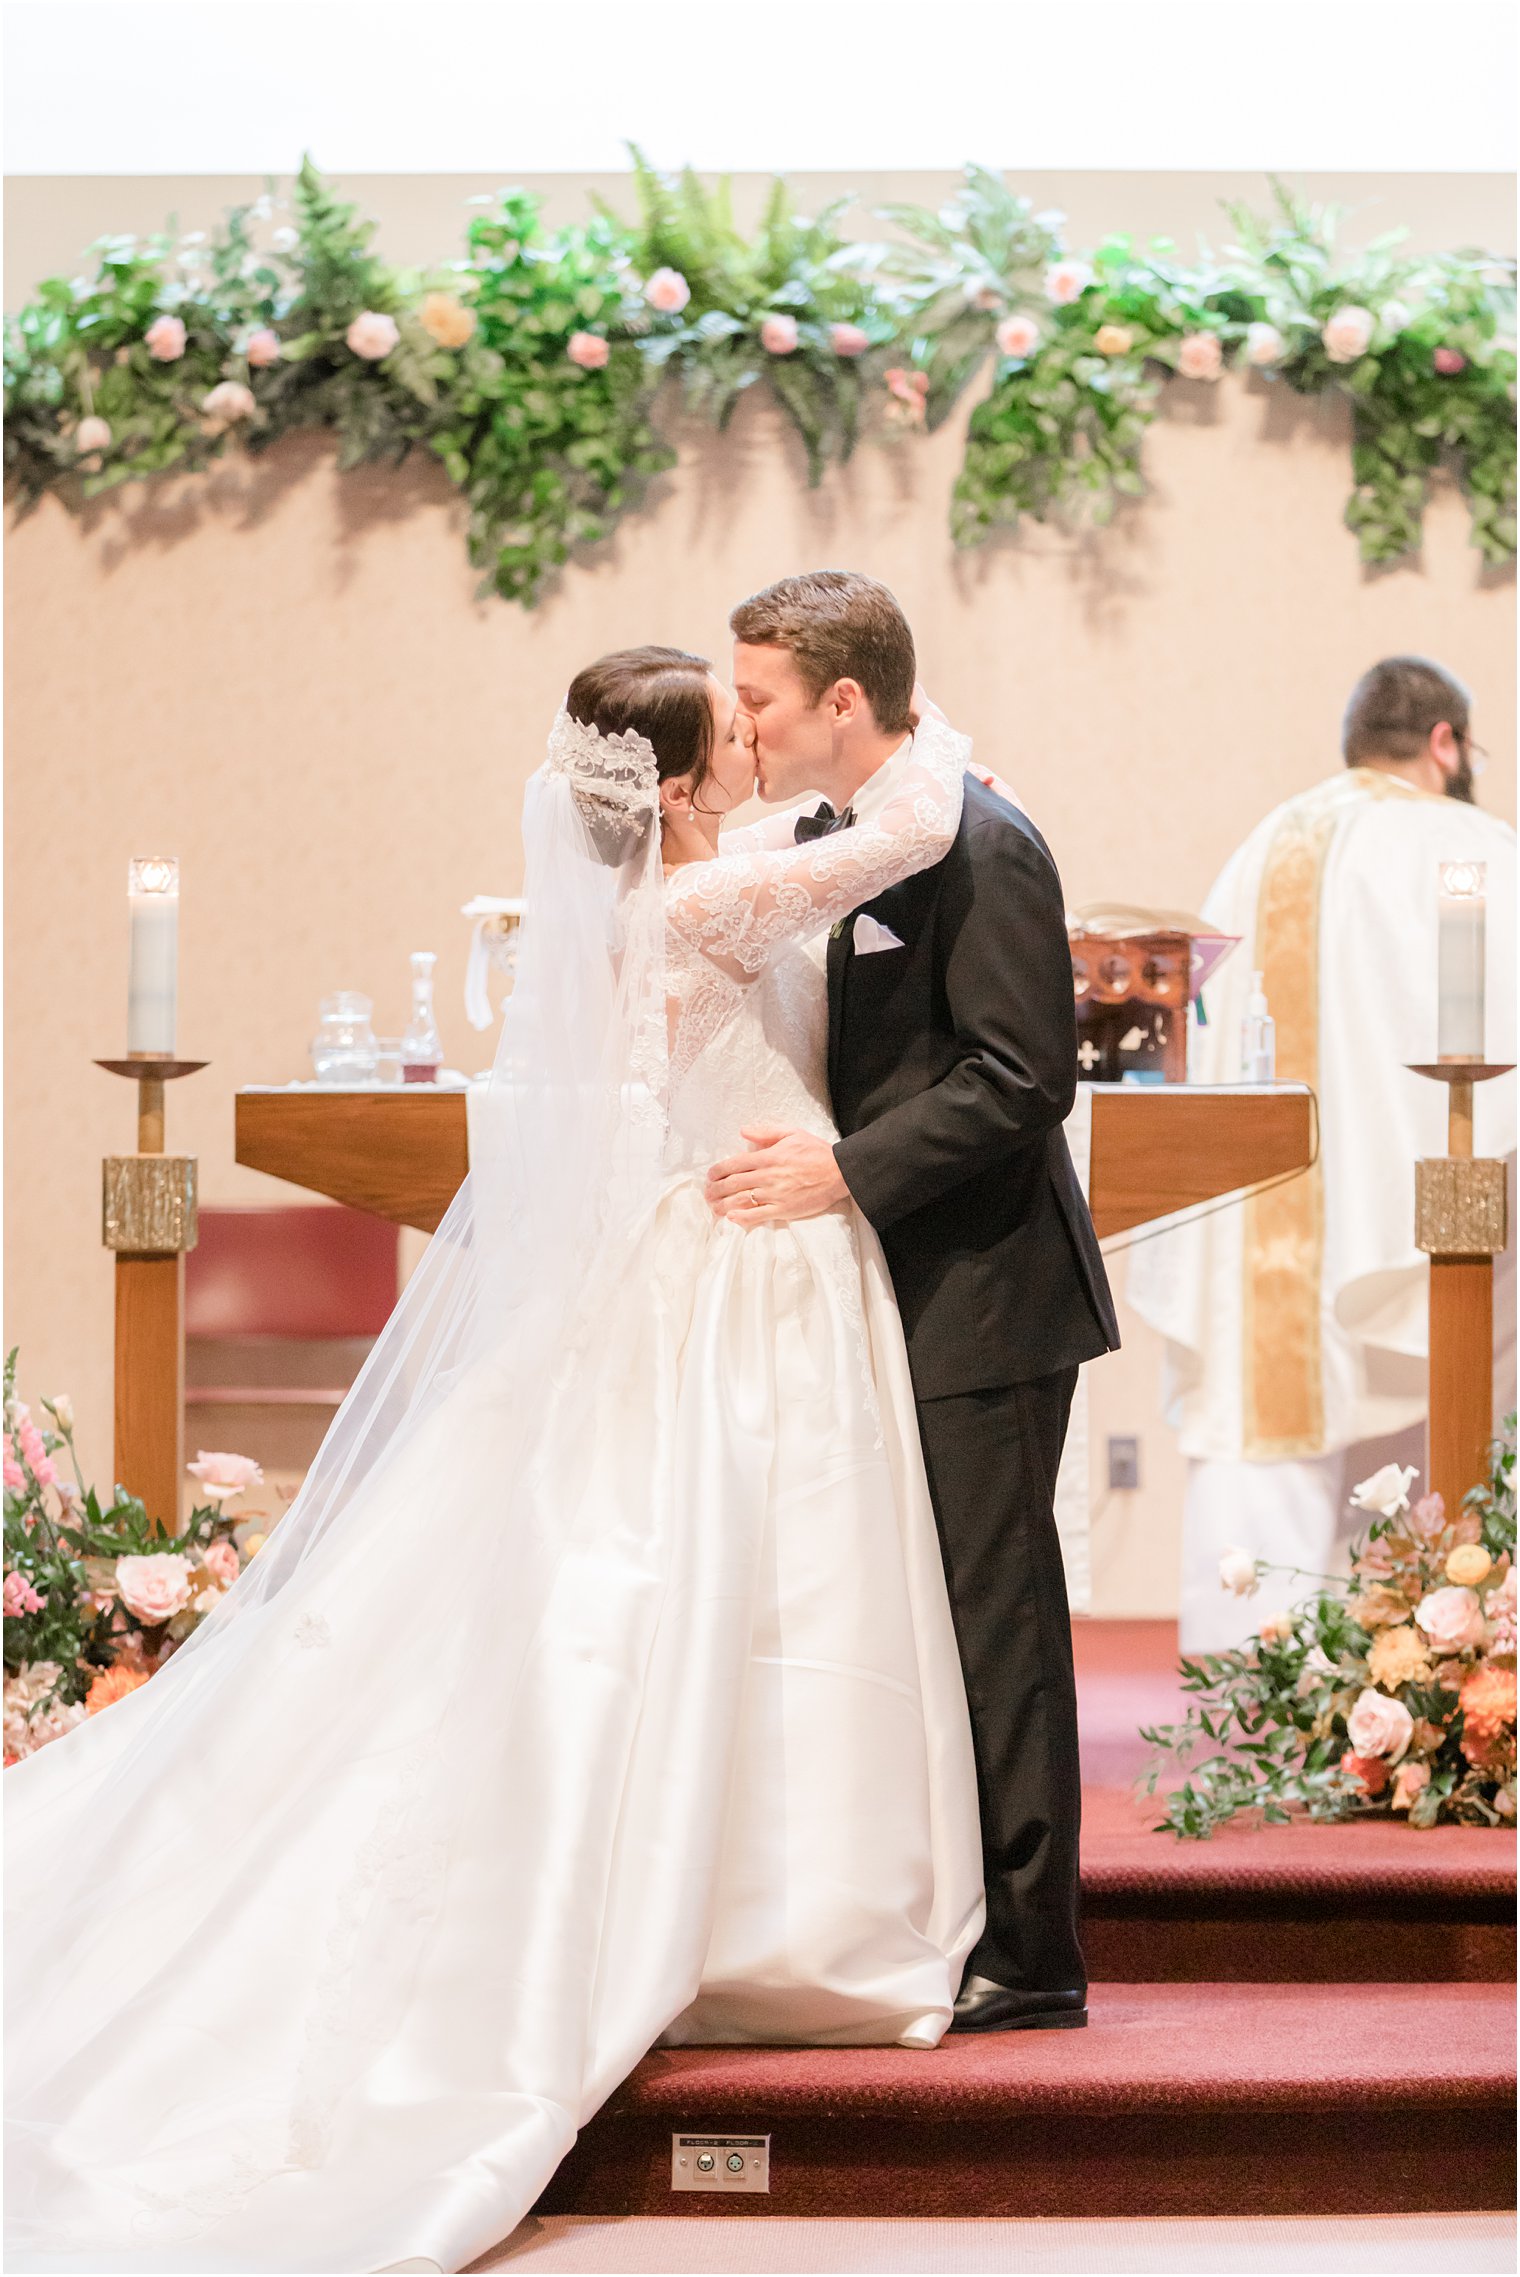 newlyweds kiss during traditional wedding ceremony in New Jersey